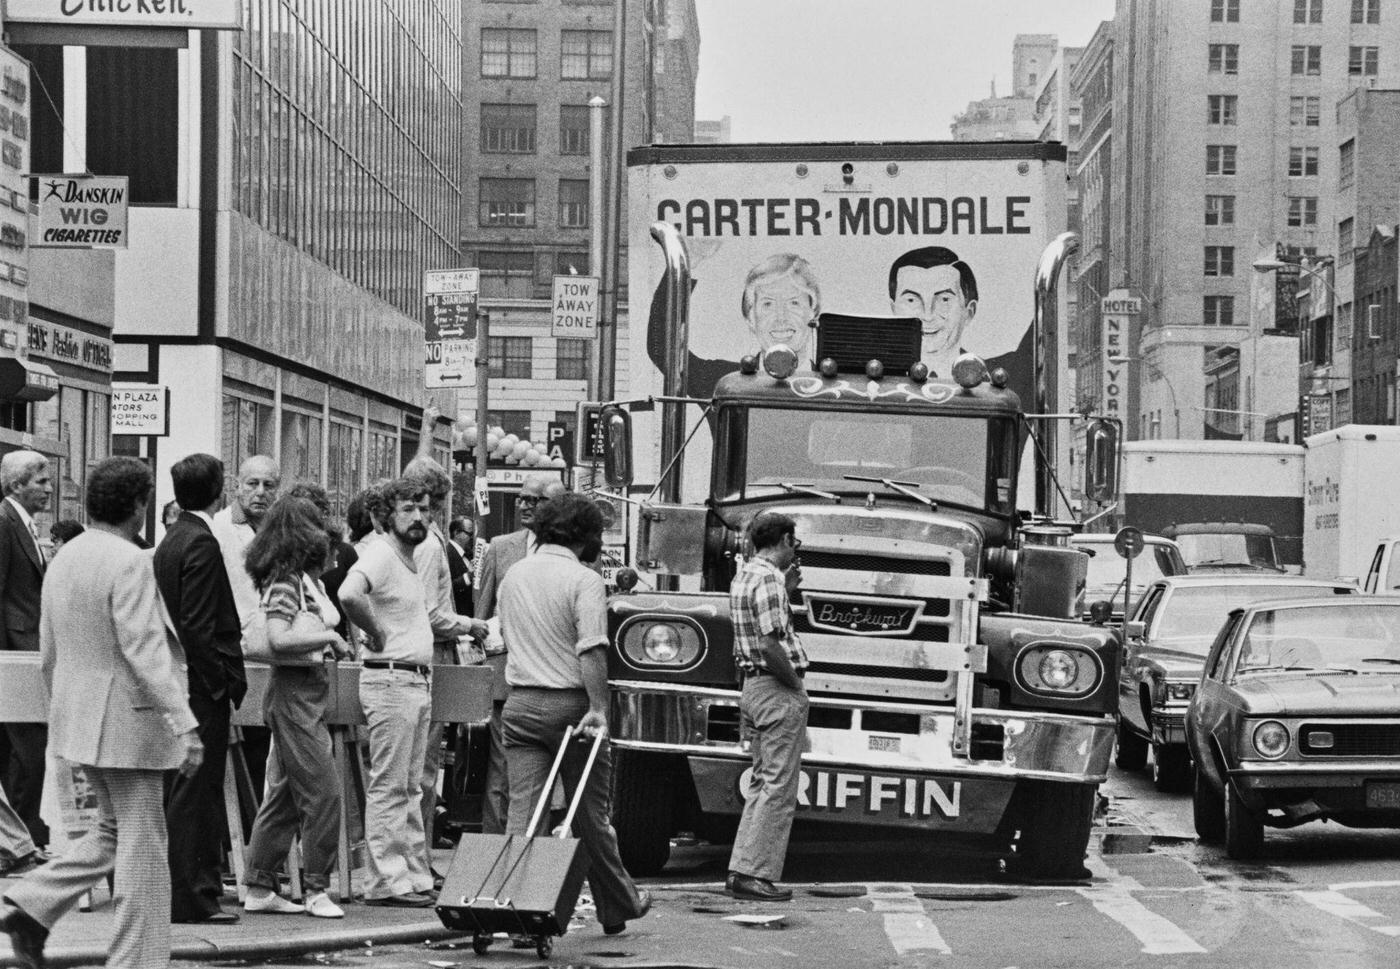 1980 Democratic National Convention, Trailer Truck In Support Of Carter And Mondale On 34Th Street, Manhattan, 1980